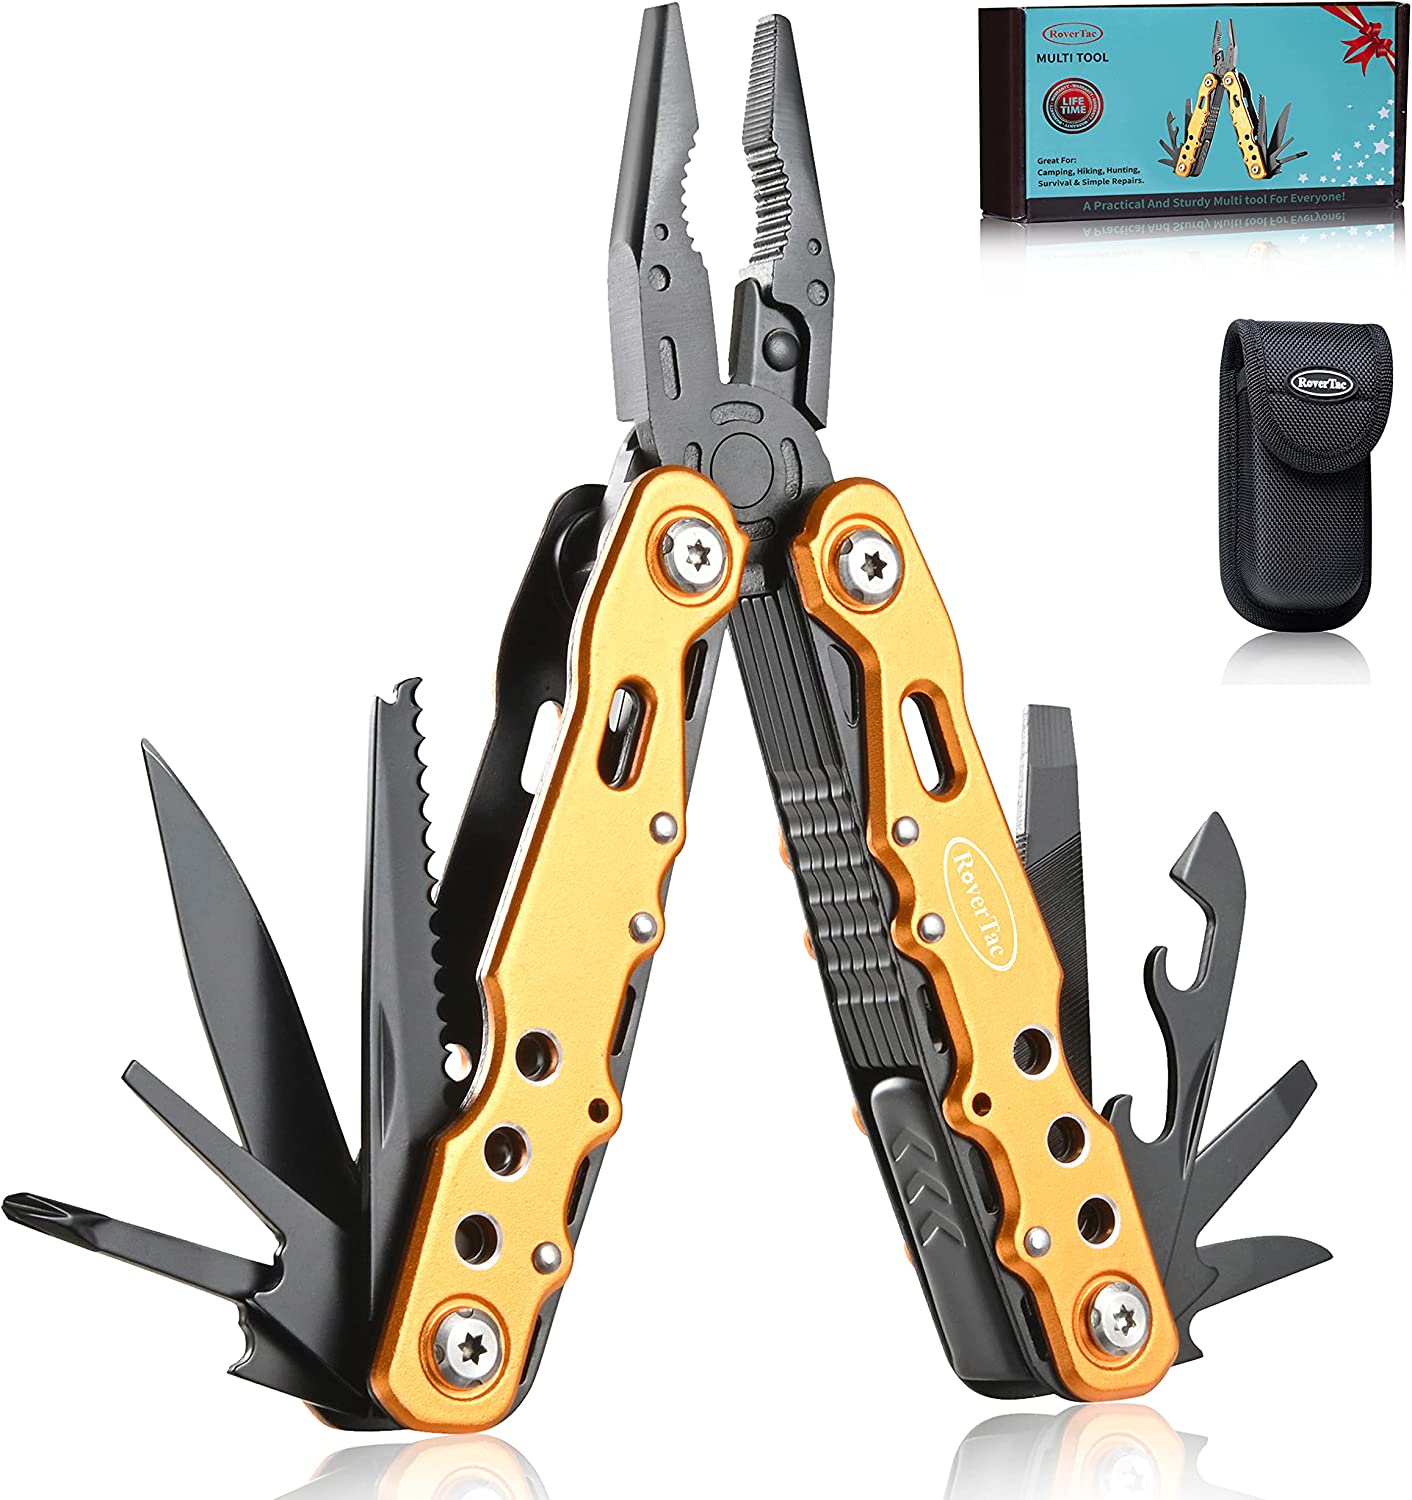 14-in-1 Multitool Pliers-Gold,Screwdrivers Saw Bottle Opener Perfect for Camping Survival Hiking Repairs